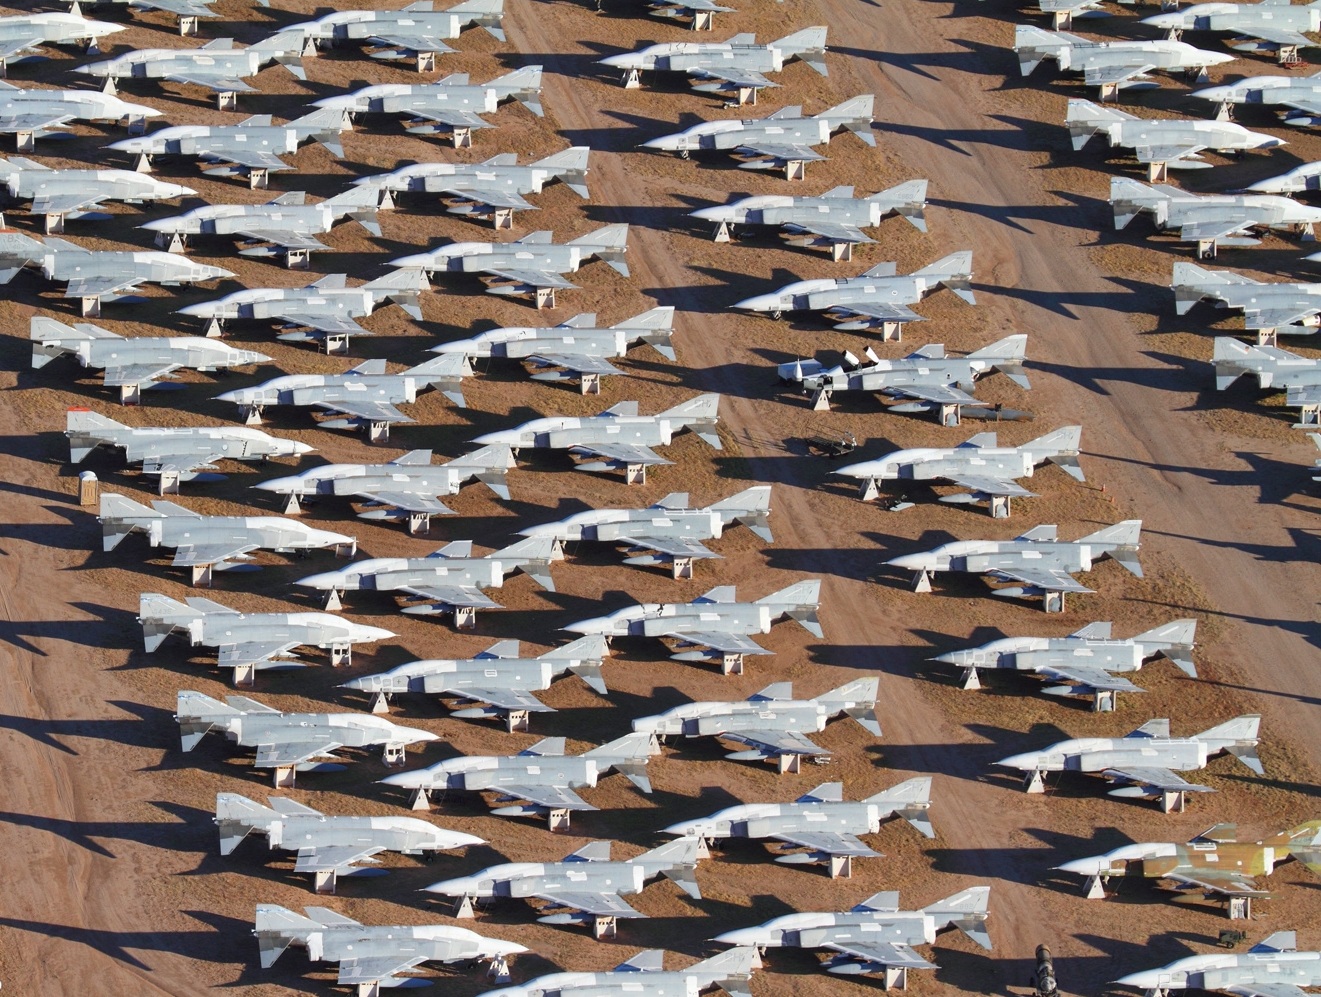 Row after row of F-4 Phantom II fighters in storage at Davis-Monthan AFB.